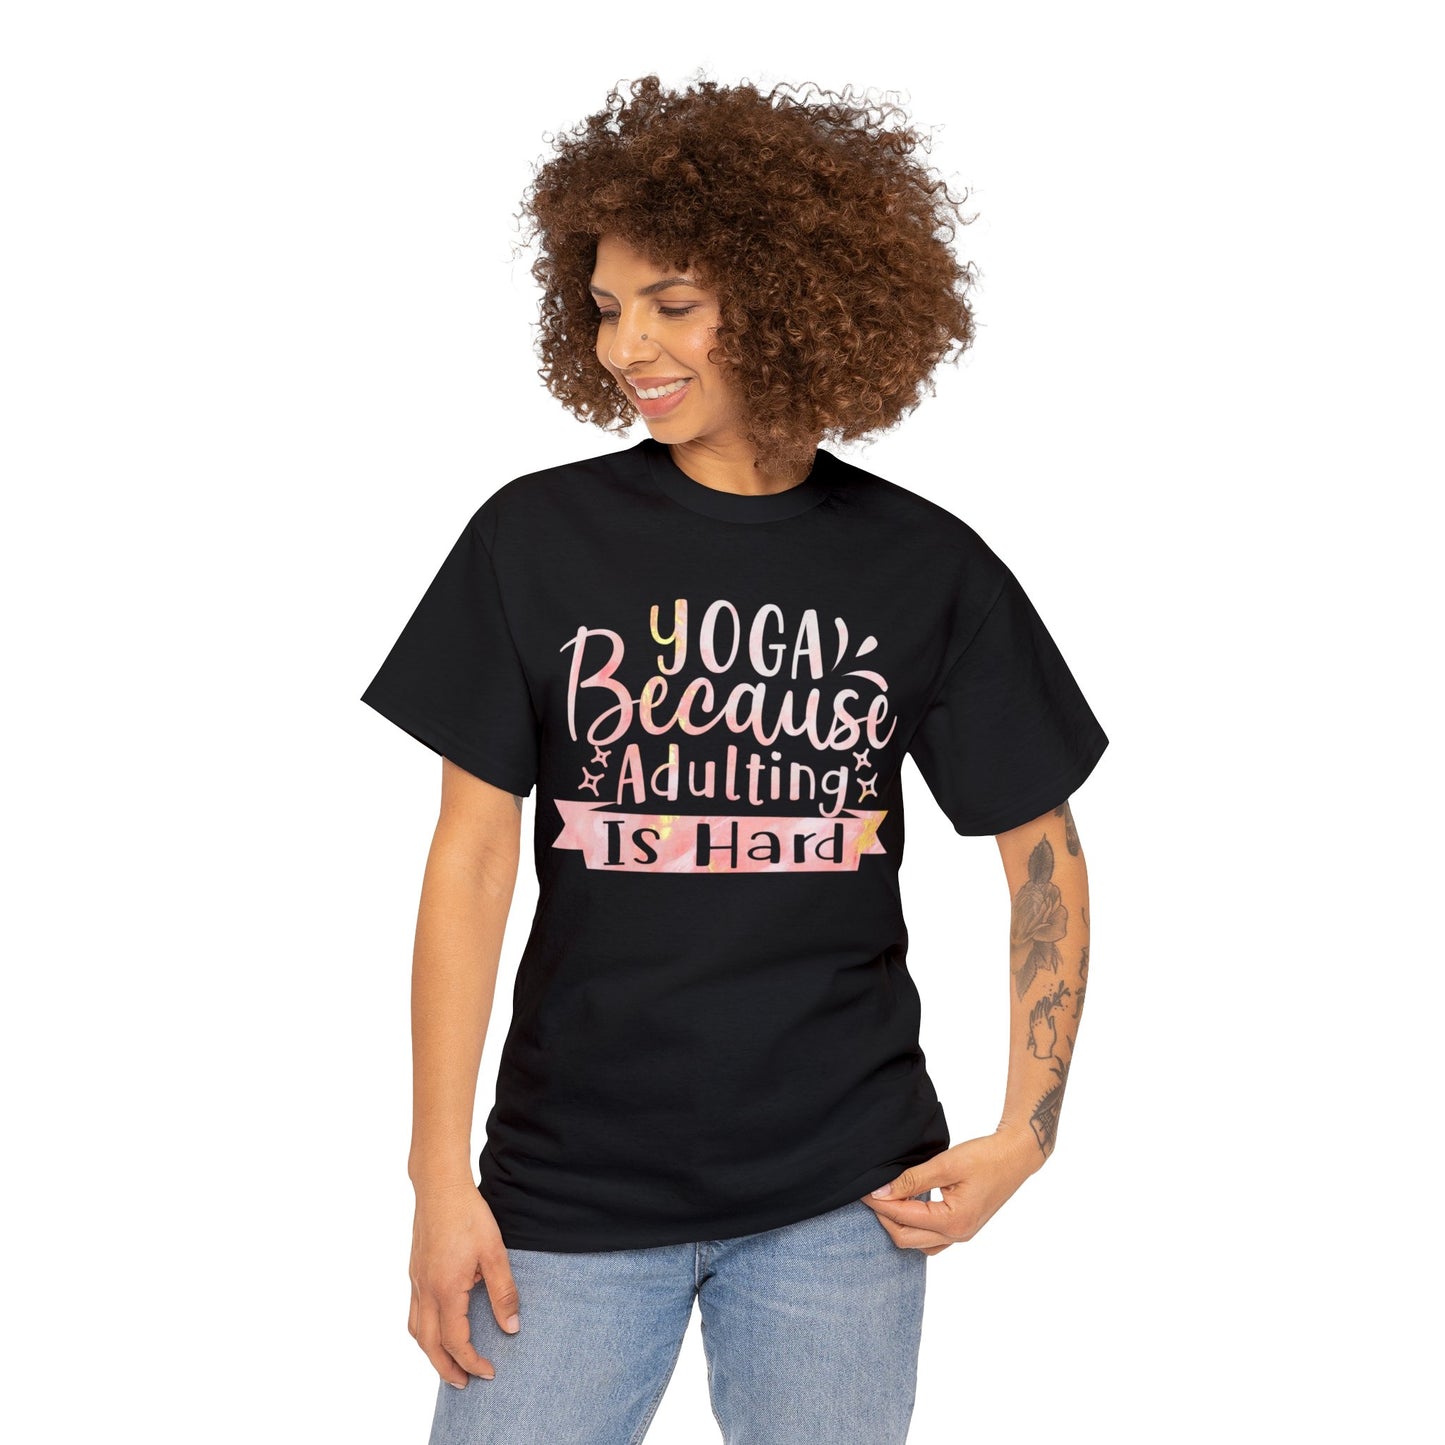 Yoga Because Adulting is Hard' T-Shirt - Embrace Comfort and Ease! Unisex Heavy Cotton Tee